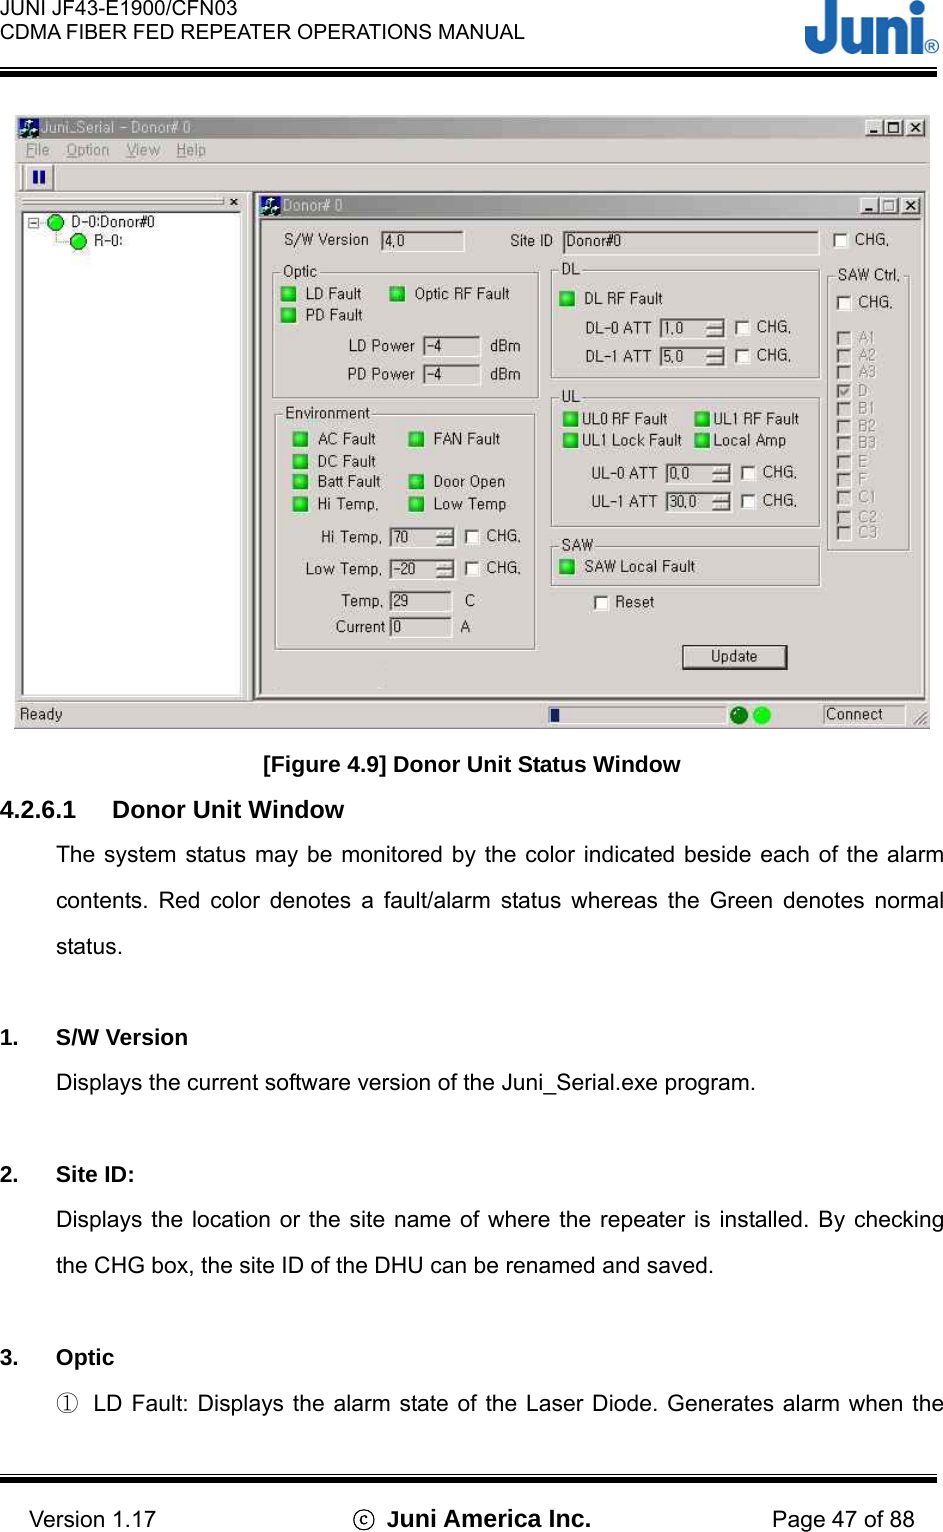  JUNI JF43-E1900/CFN03 CDMA FIBER FED REPEATER OPERATIONS MANUAL                                    Version 1.17  ⓒ Juni America Inc. Page 47 of 88  [Figure 4.9] Donor Unit Status Window 4.2.6.1  Donor Unit Window The system status may be monitored by the color indicated beside each of the alarm contents. Red color denotes a fault/alarm status whereas the Green denotes normal status.   1. S/W Version Displays the current software version of the Juni_Serial.exe program.    2. Site ID: Displays the location or the site name of where the repeater is installed. By checking the CHG box, the site ID of the DHU can be renamed and saved.  3. Optic ①  LD Fault: Displays the alarm state of the Laser Diode. Generates alarm when the 